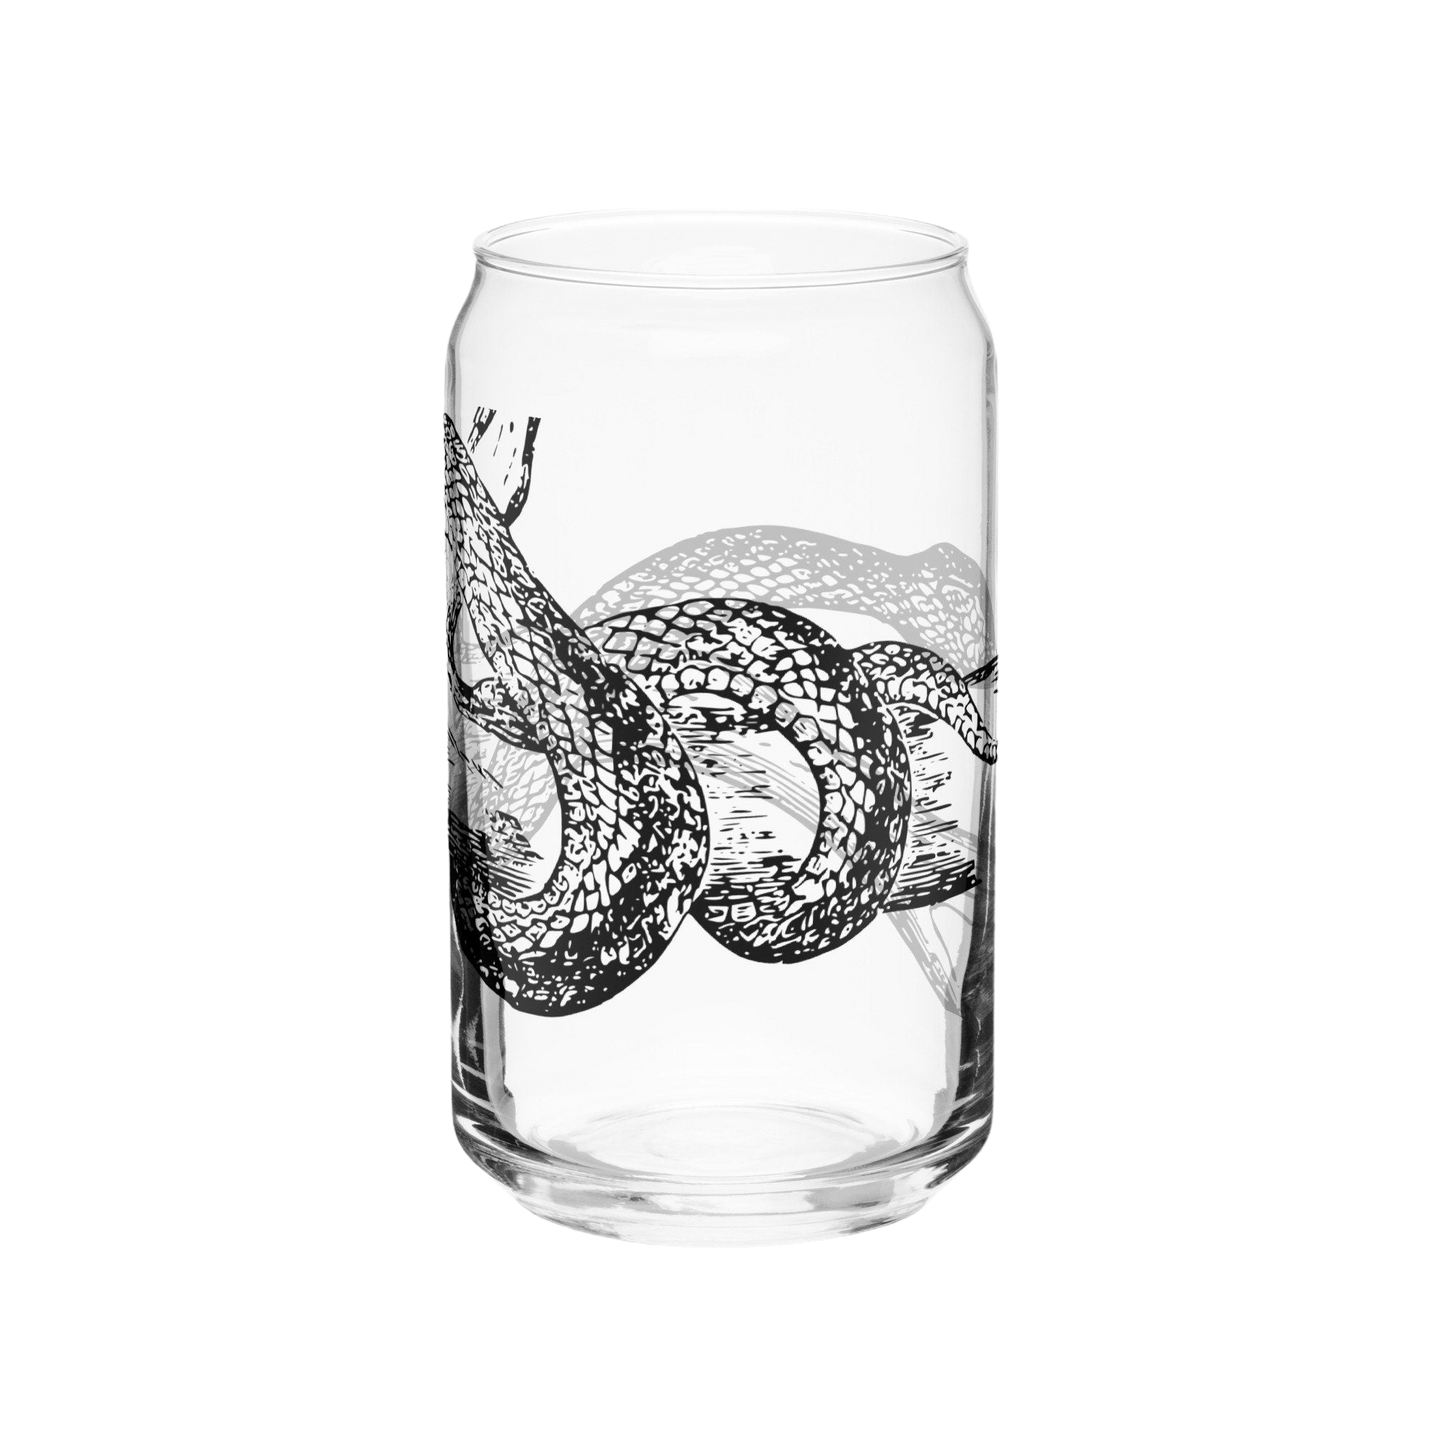 a glass with a snake drawn on it